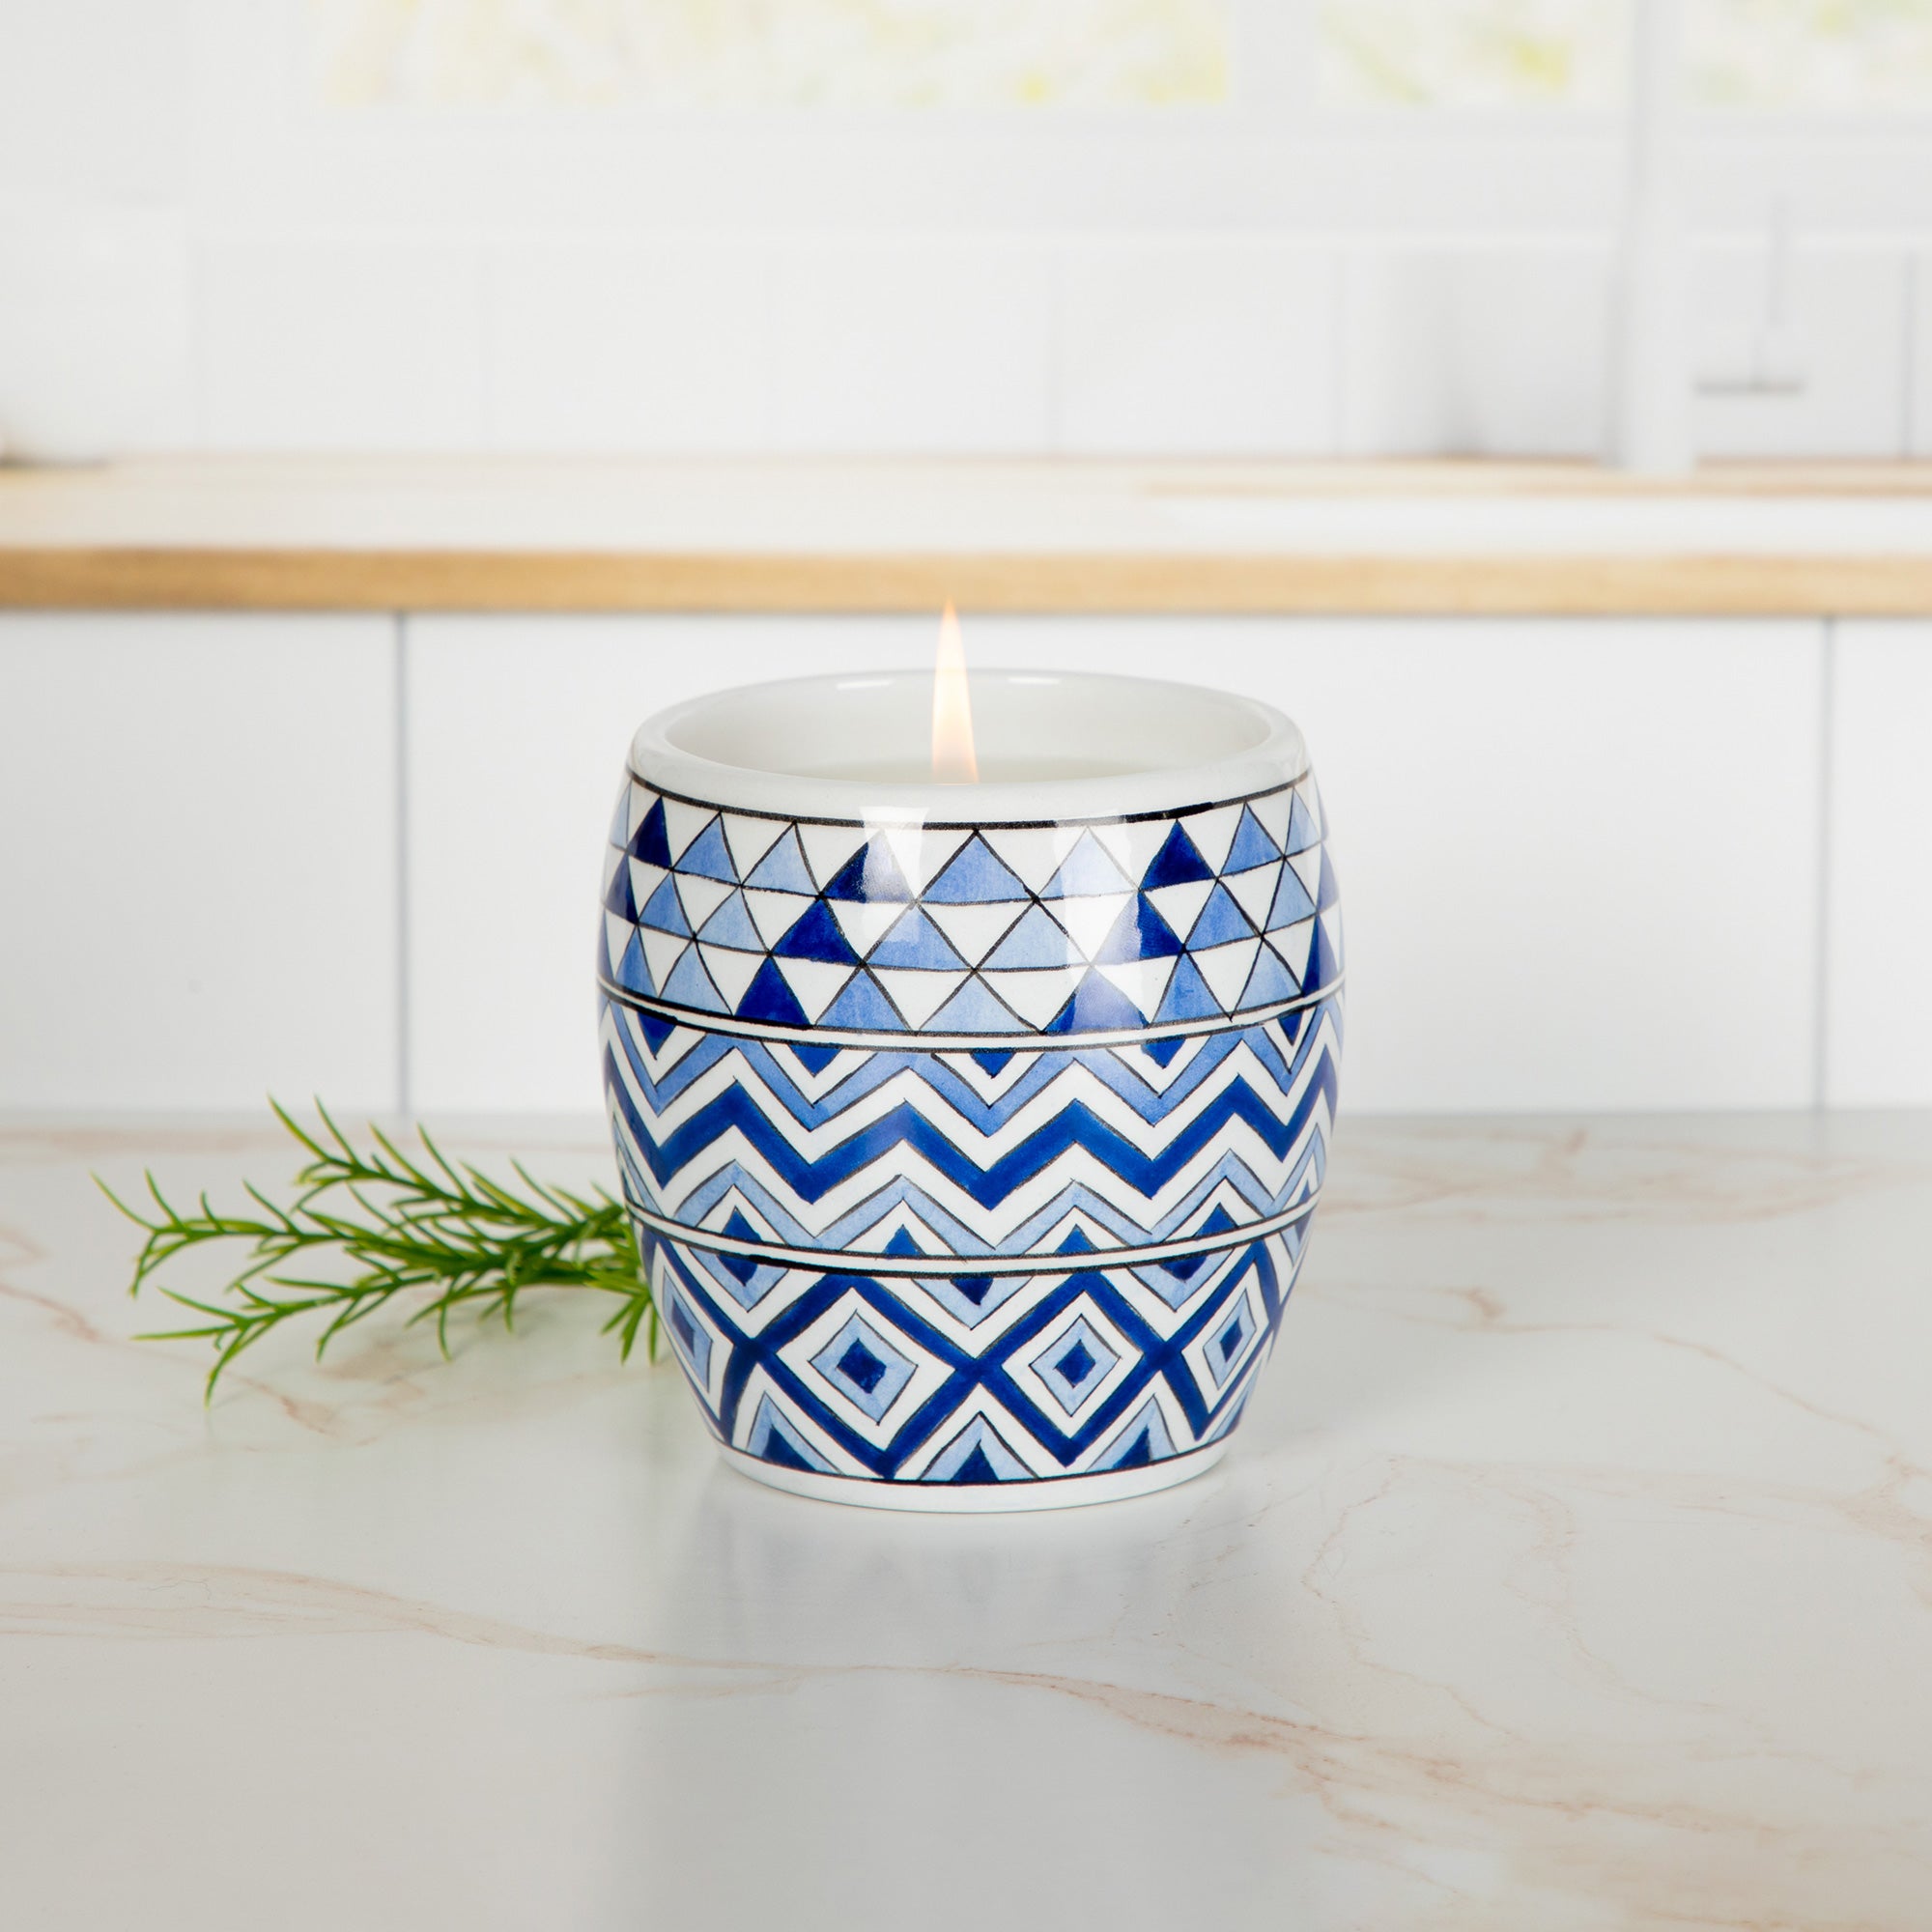 Ceramic Artisan Hand-Poured Candle - Rosemary - Sapphire Mosaic